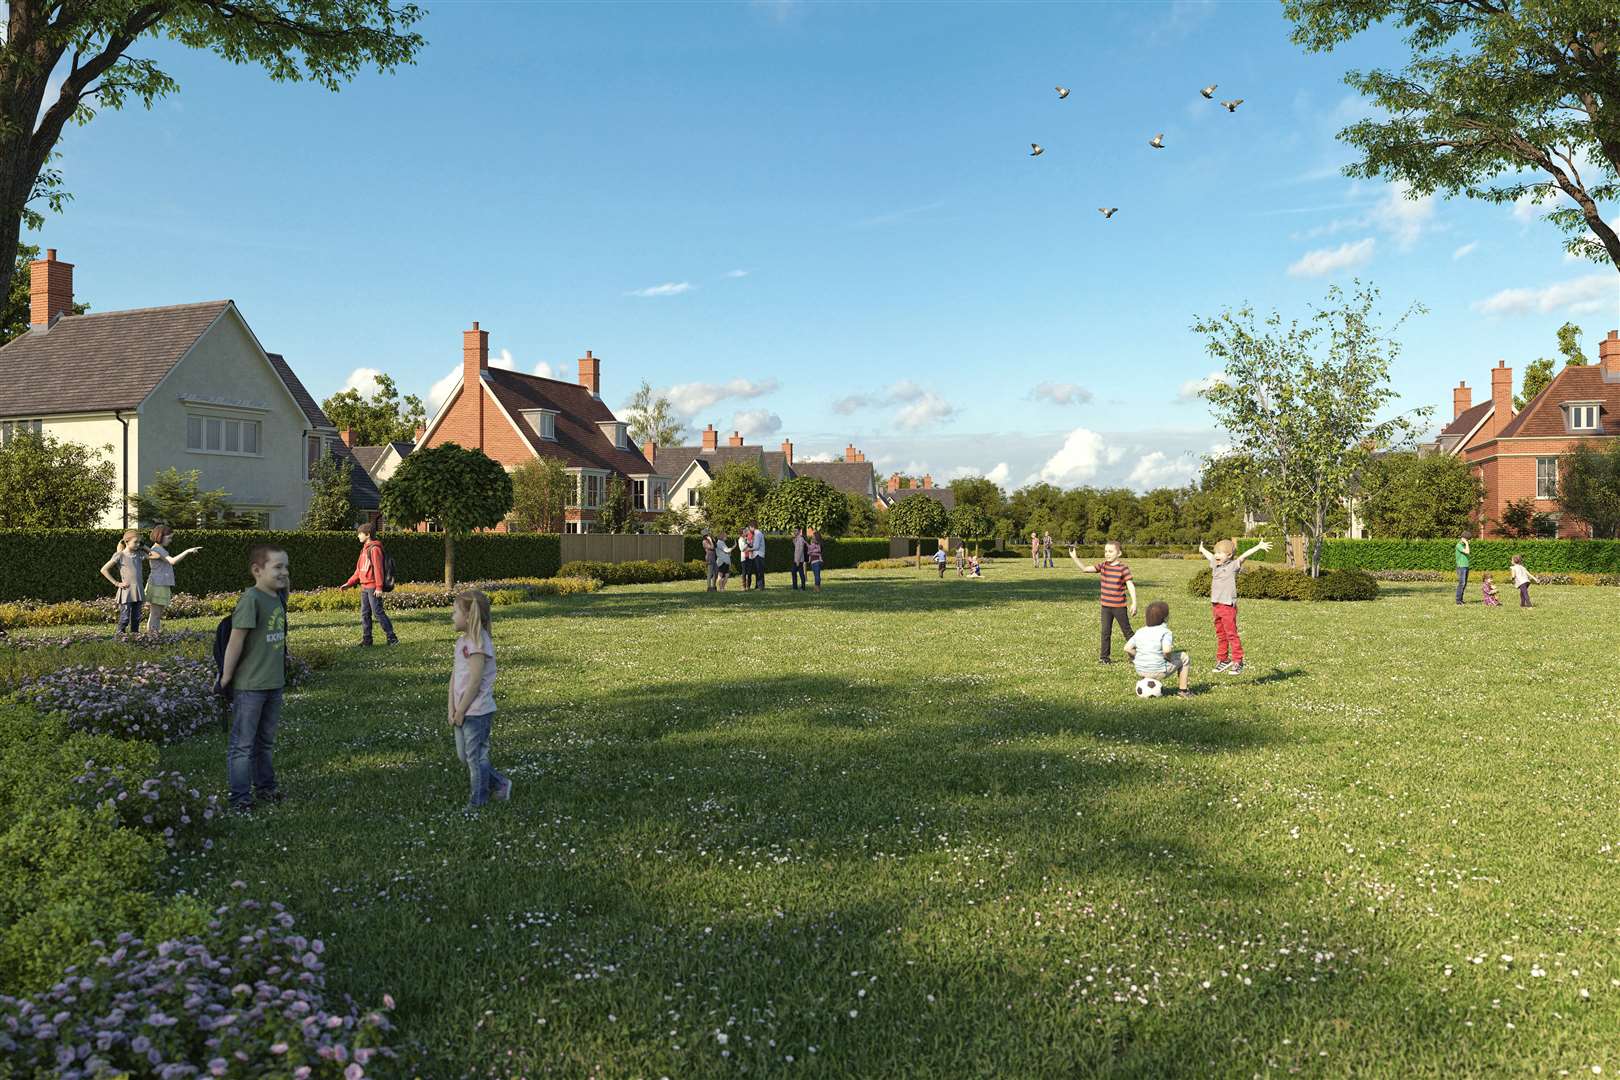 Green spaces have been highlighted throughout the scheme